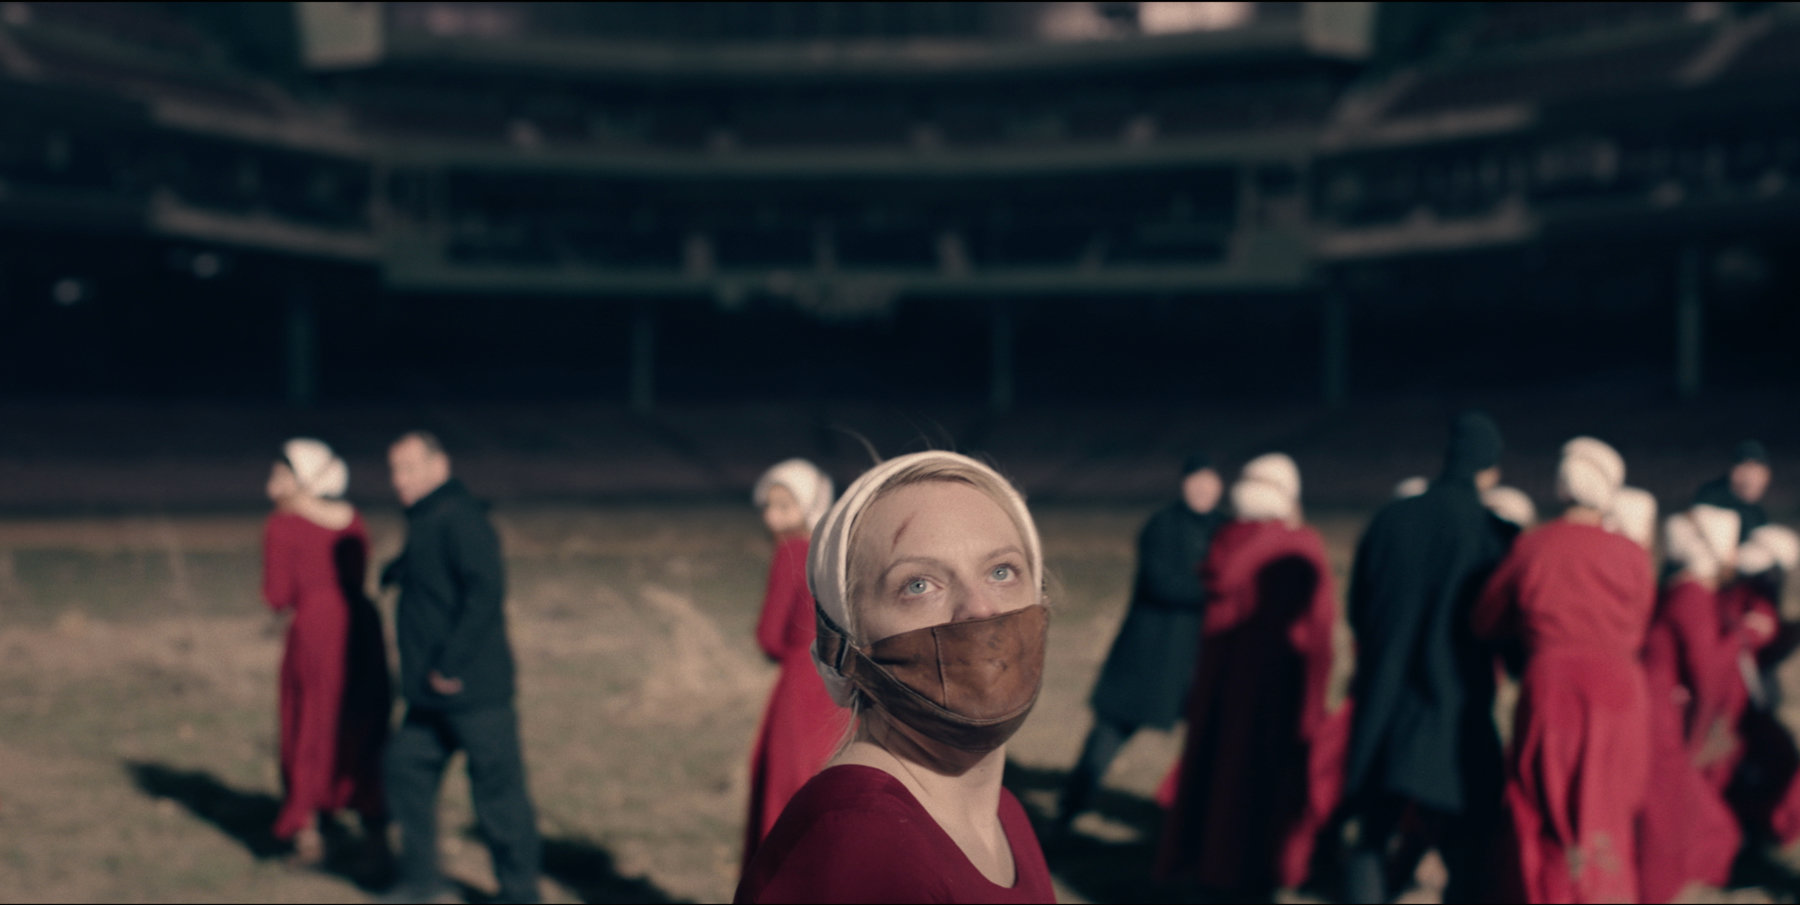 June and other handmaids are being led by guards around an abandoned stadium field. 